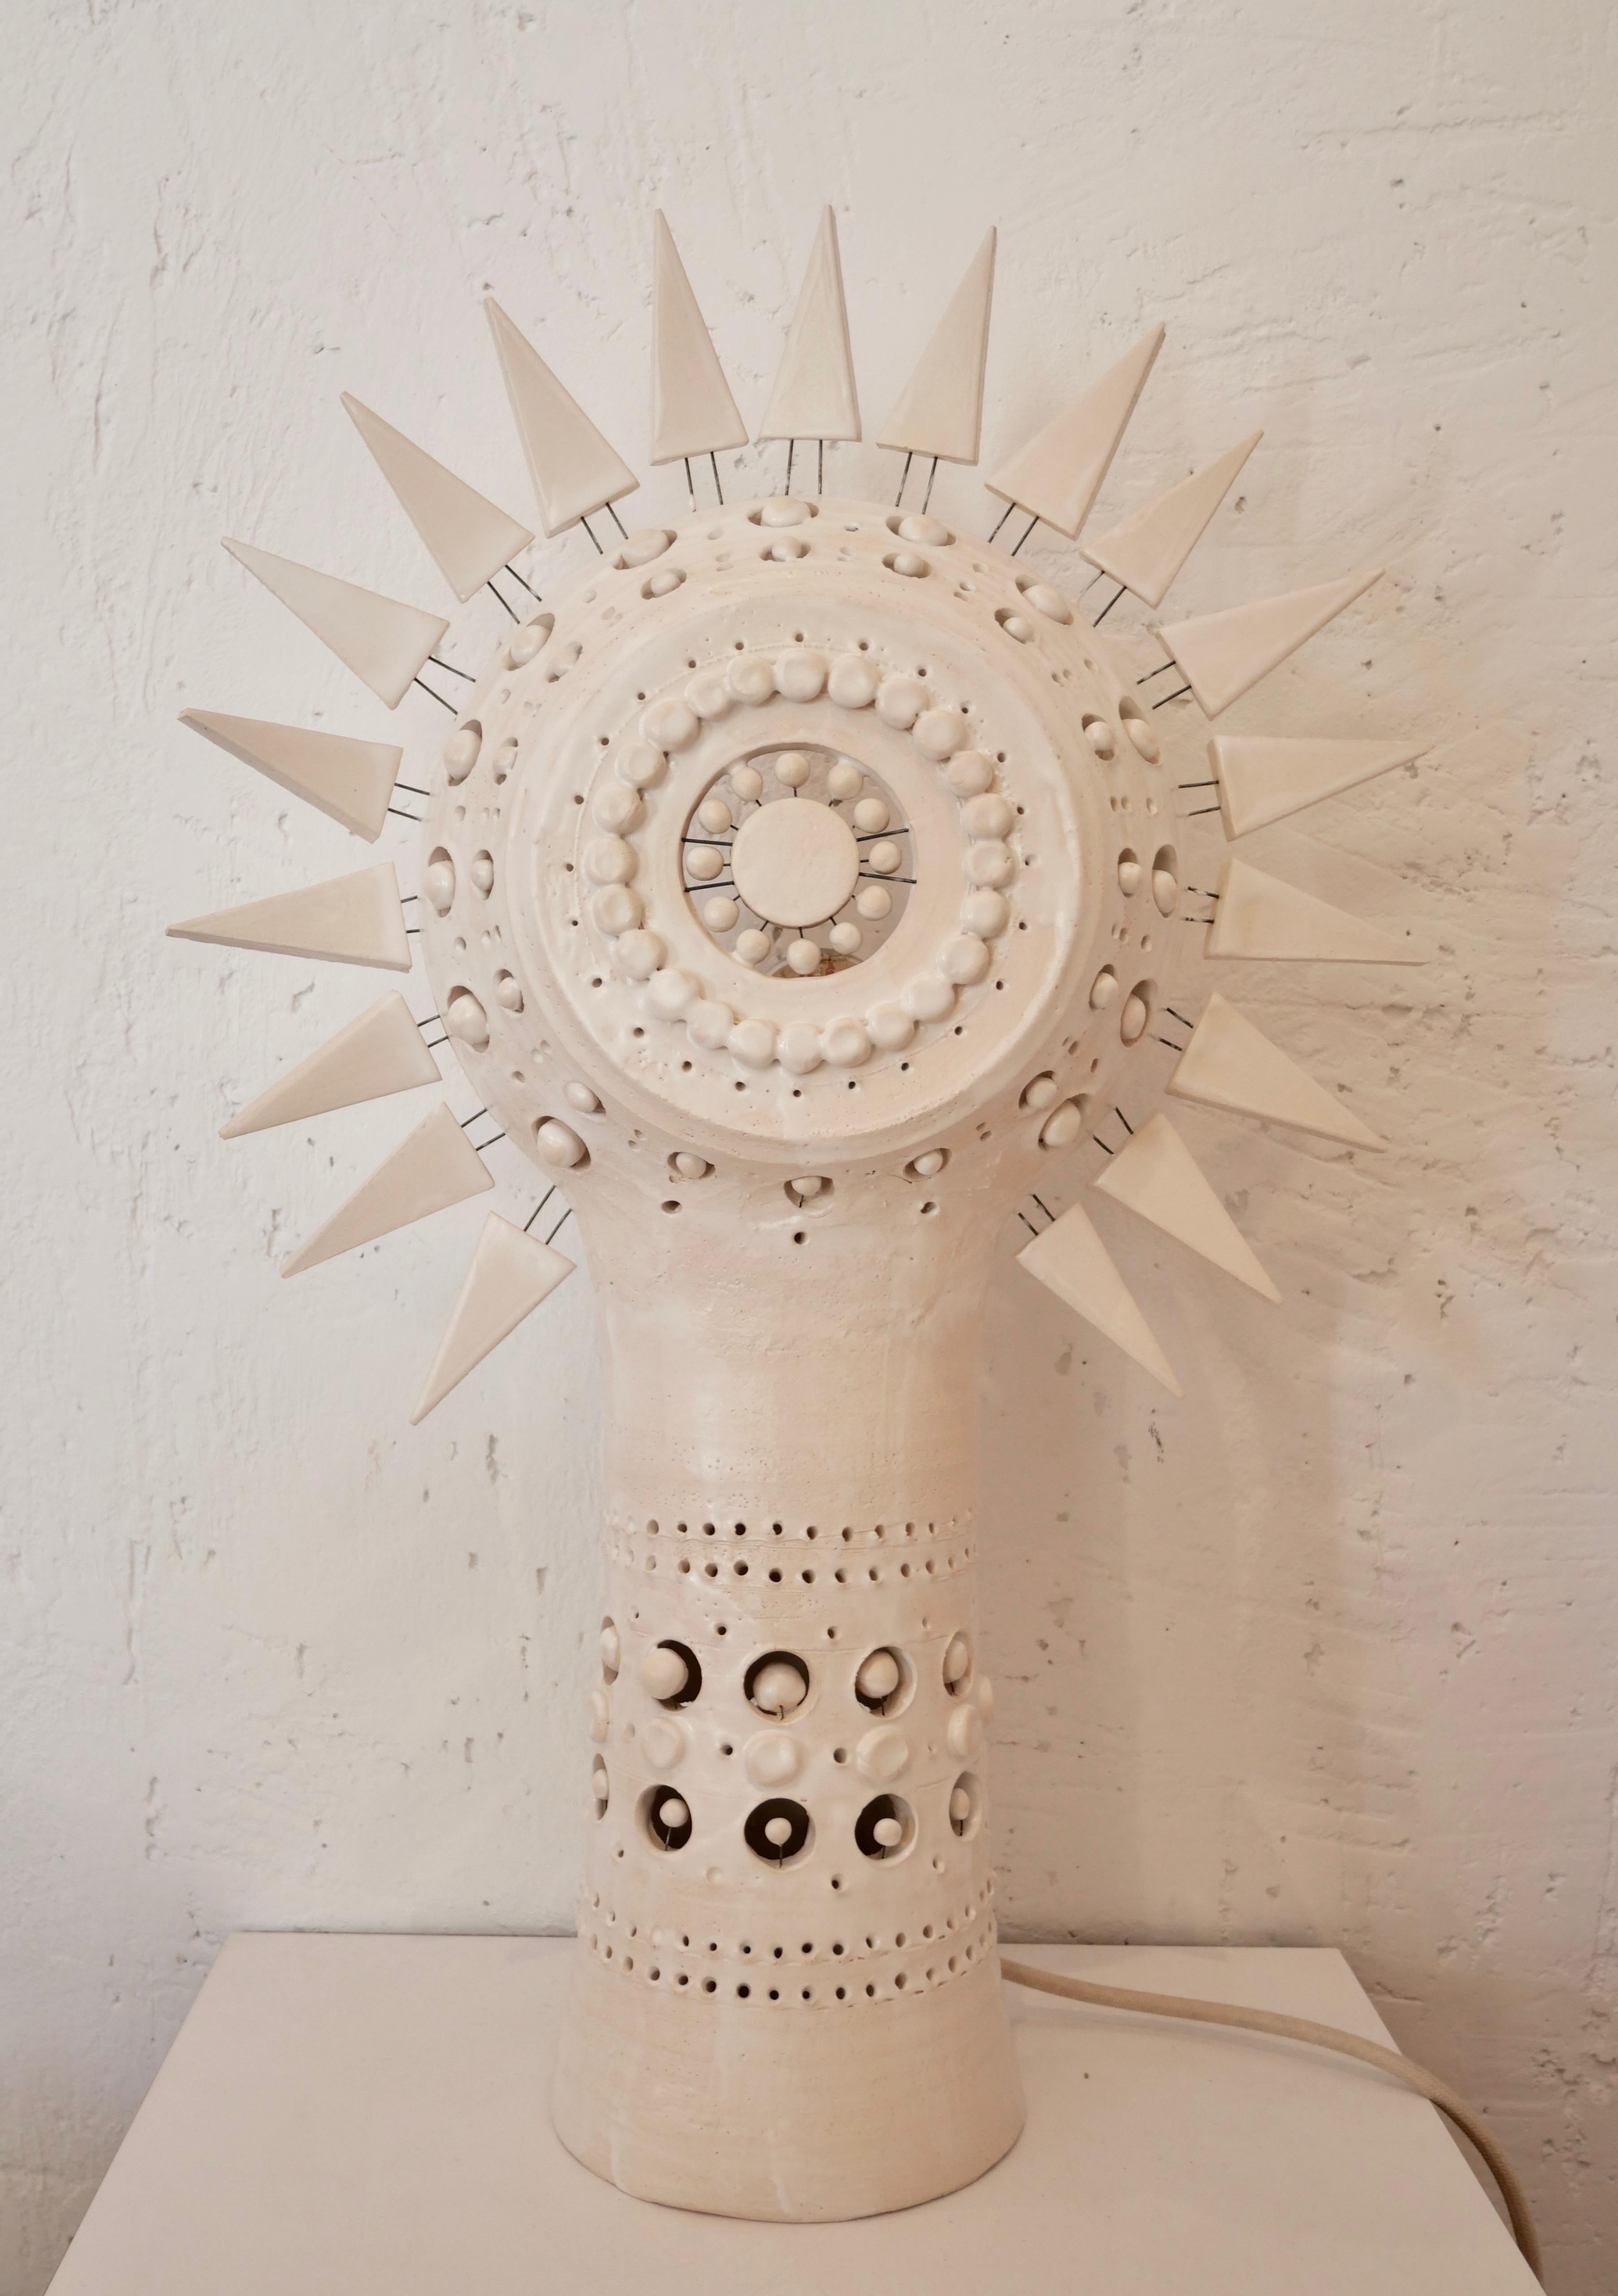 Sun table lamp in white enameled ceramic, table lamp bringing to your space an amazing light experience when the night falls, and a stunning sculptural presence during the day. Approx dimensions height 57 cm x width 38 cm. Signed on the base by the